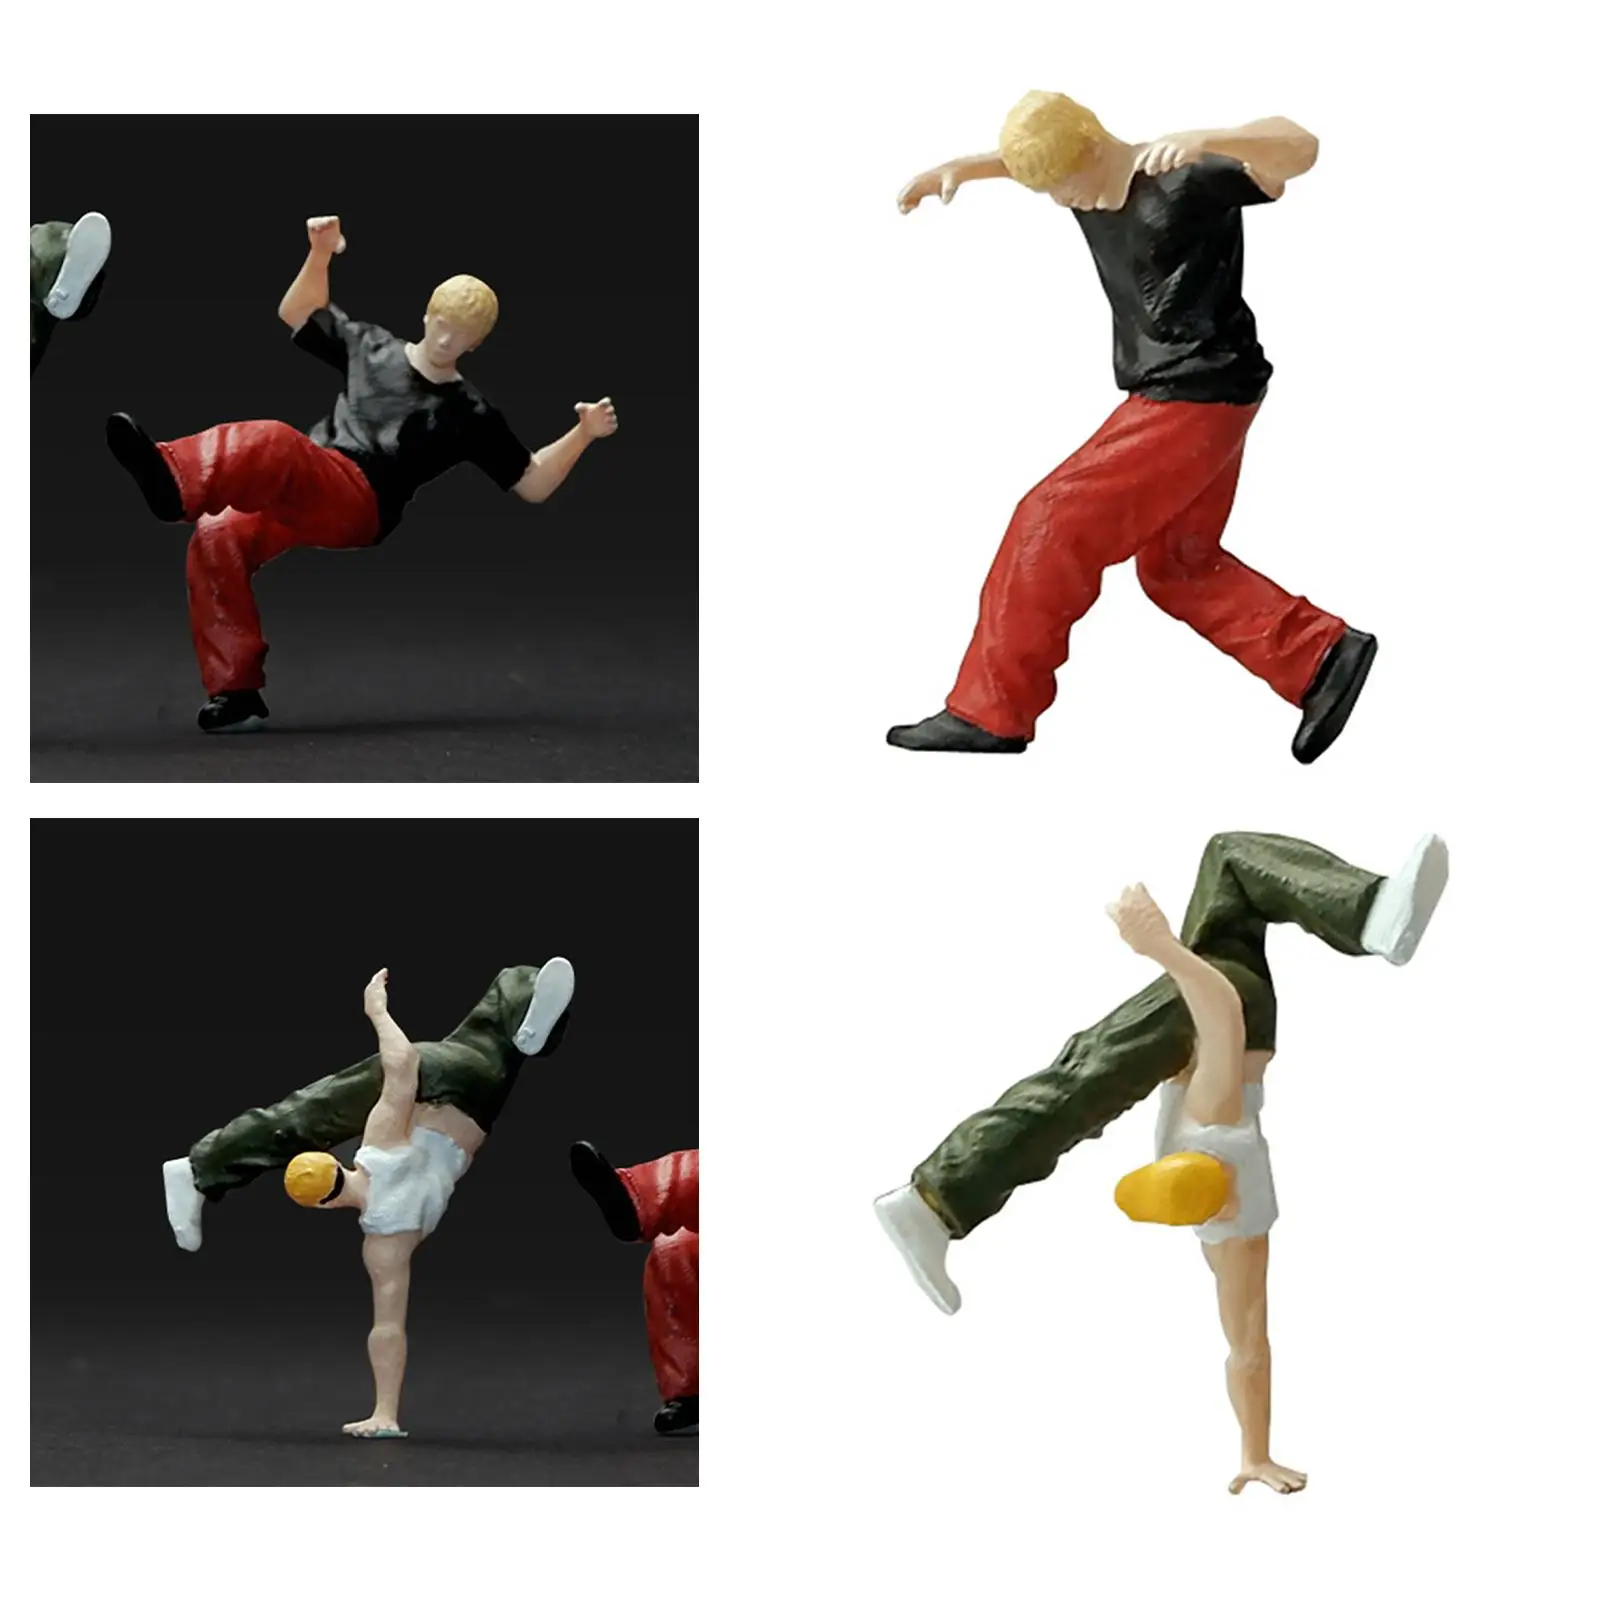 1:64 Figure Street Dancer Miniature Scenes Handpainted Tiny People for Architecture Model DIY Projects Diorama Layout Sand Table